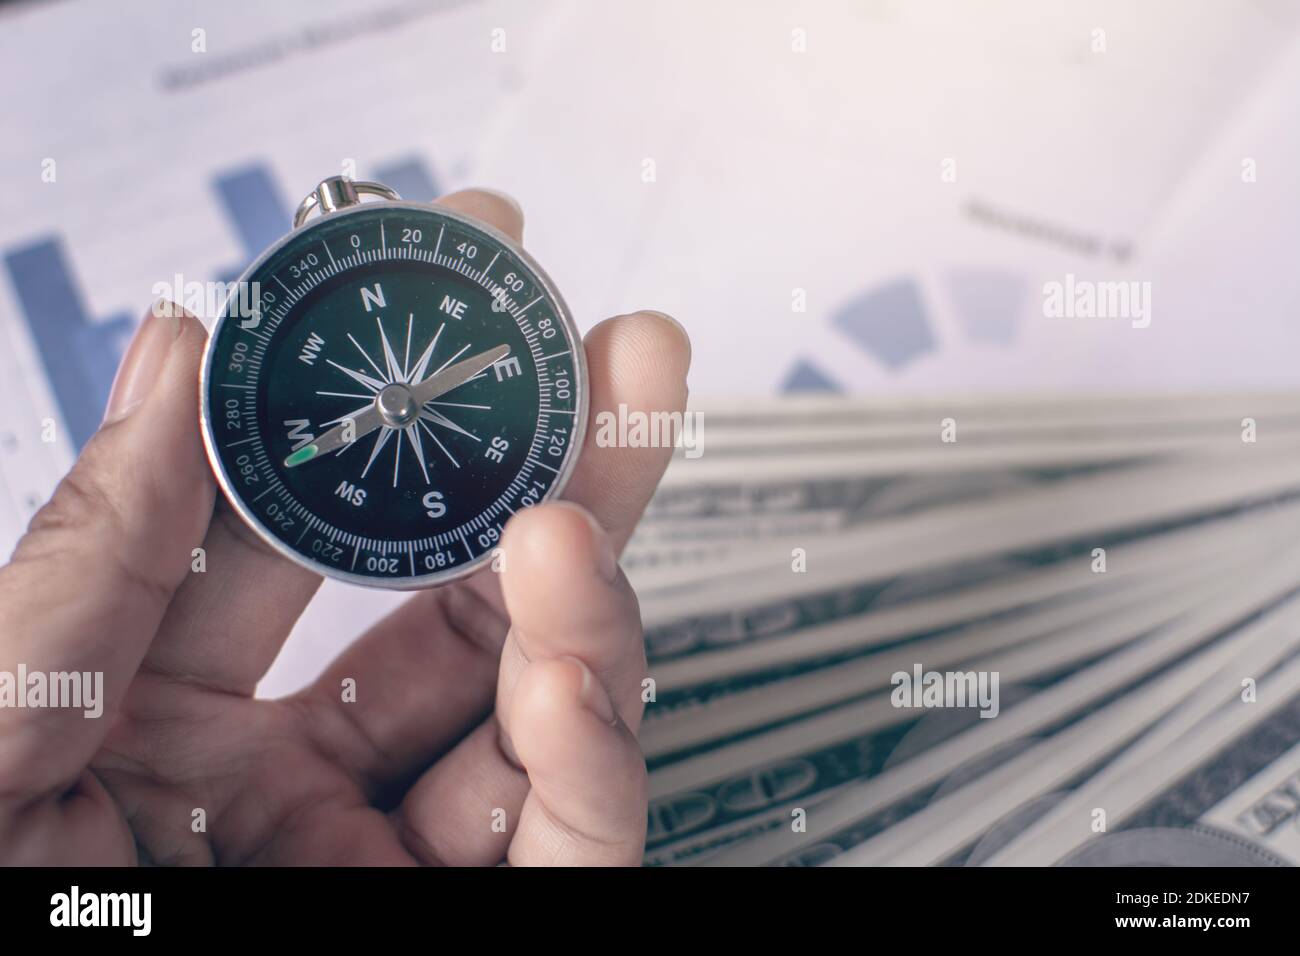 Cropped Hand Holding Navigational Compass Against Papers Stock Photo